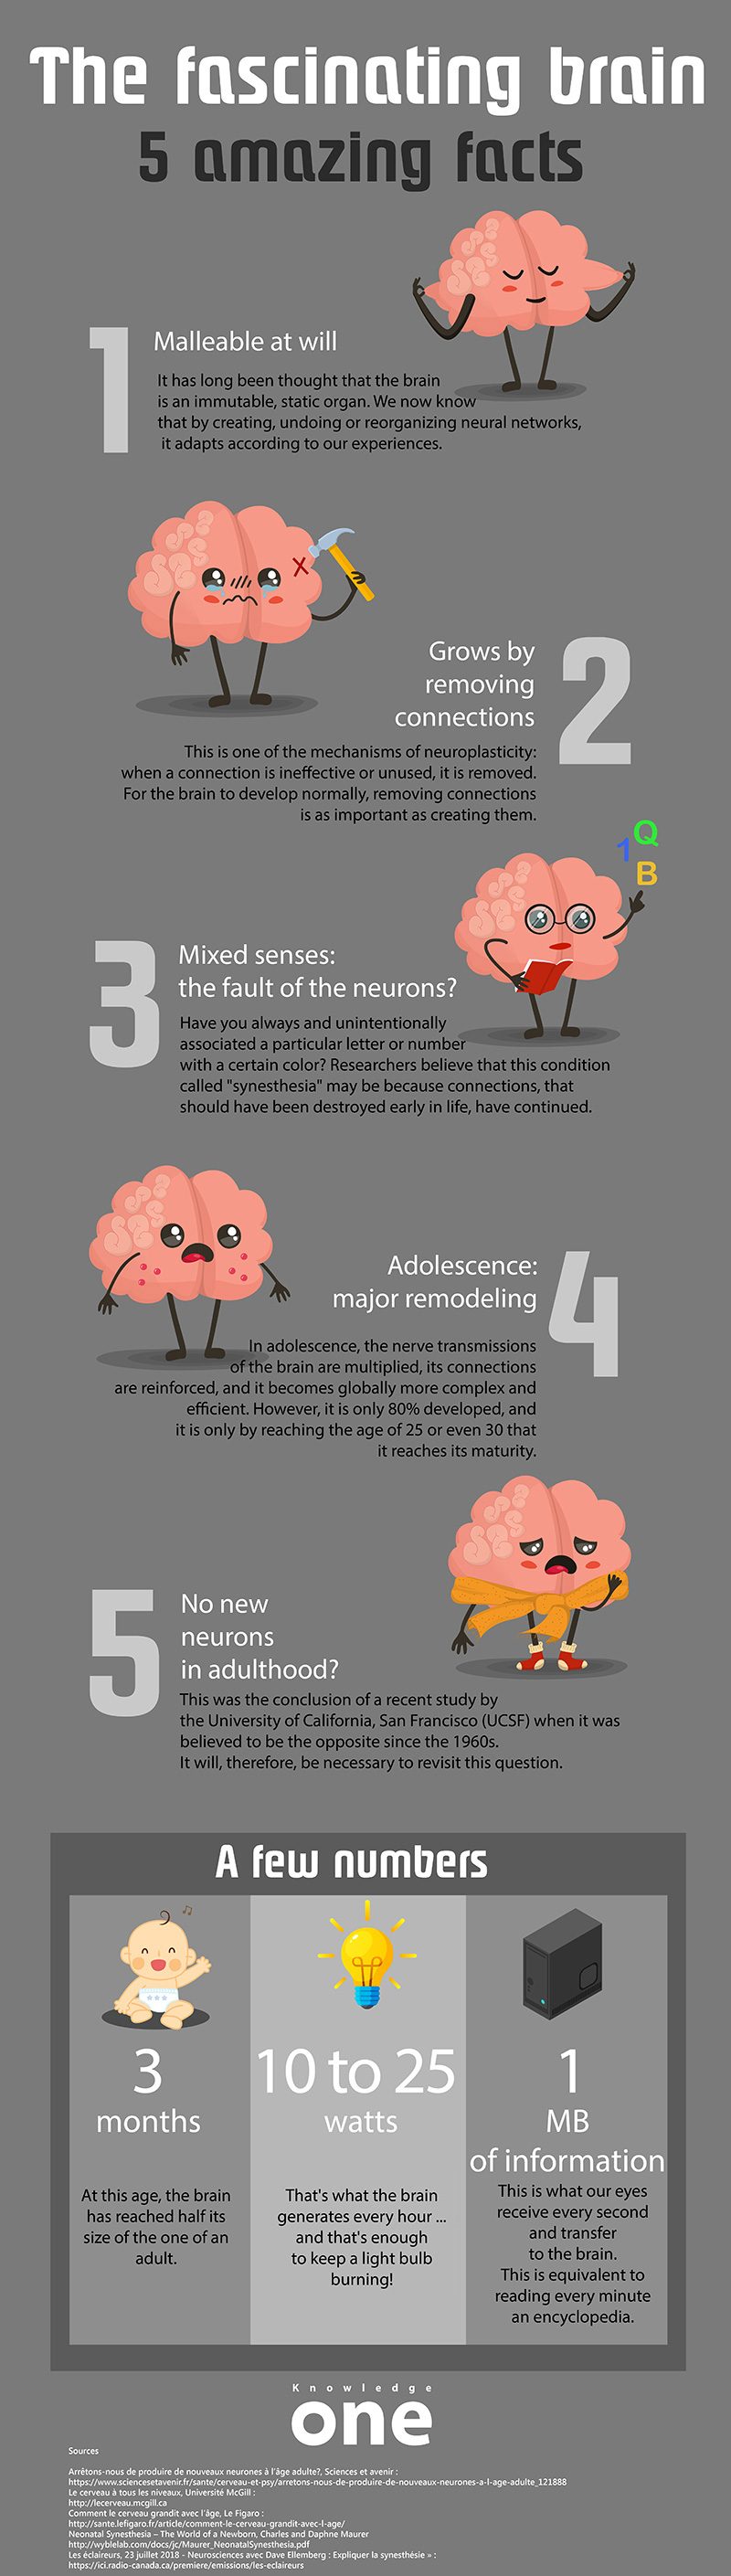 Infographic on 5 amazing facts about the brain